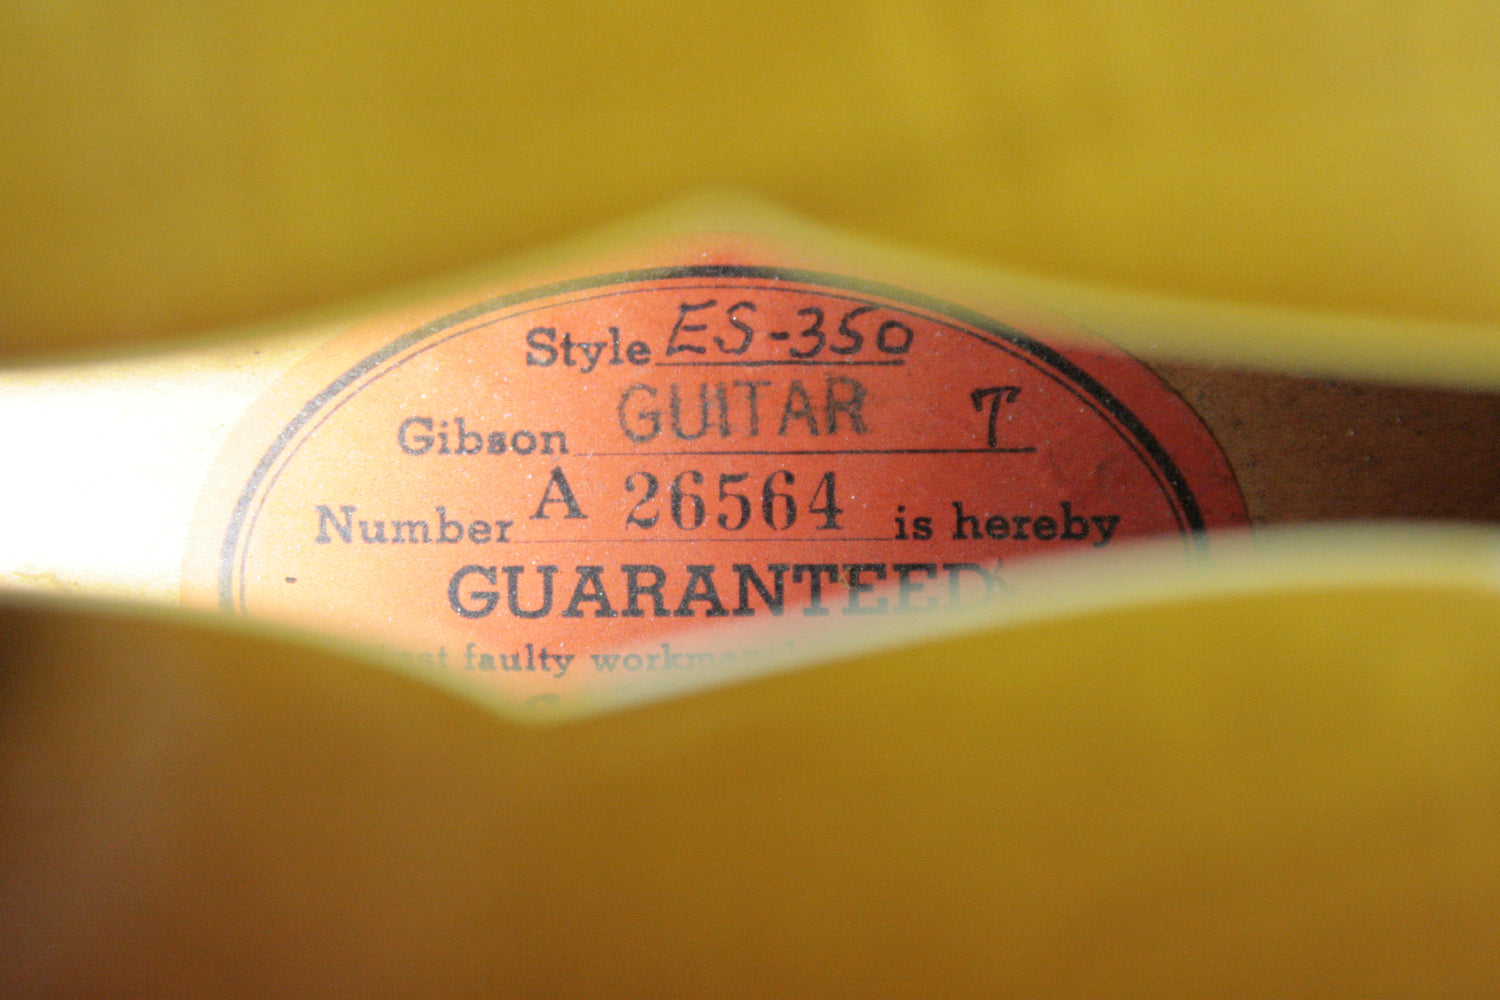 1950's Gibson Orange Label with Serial Number and Model